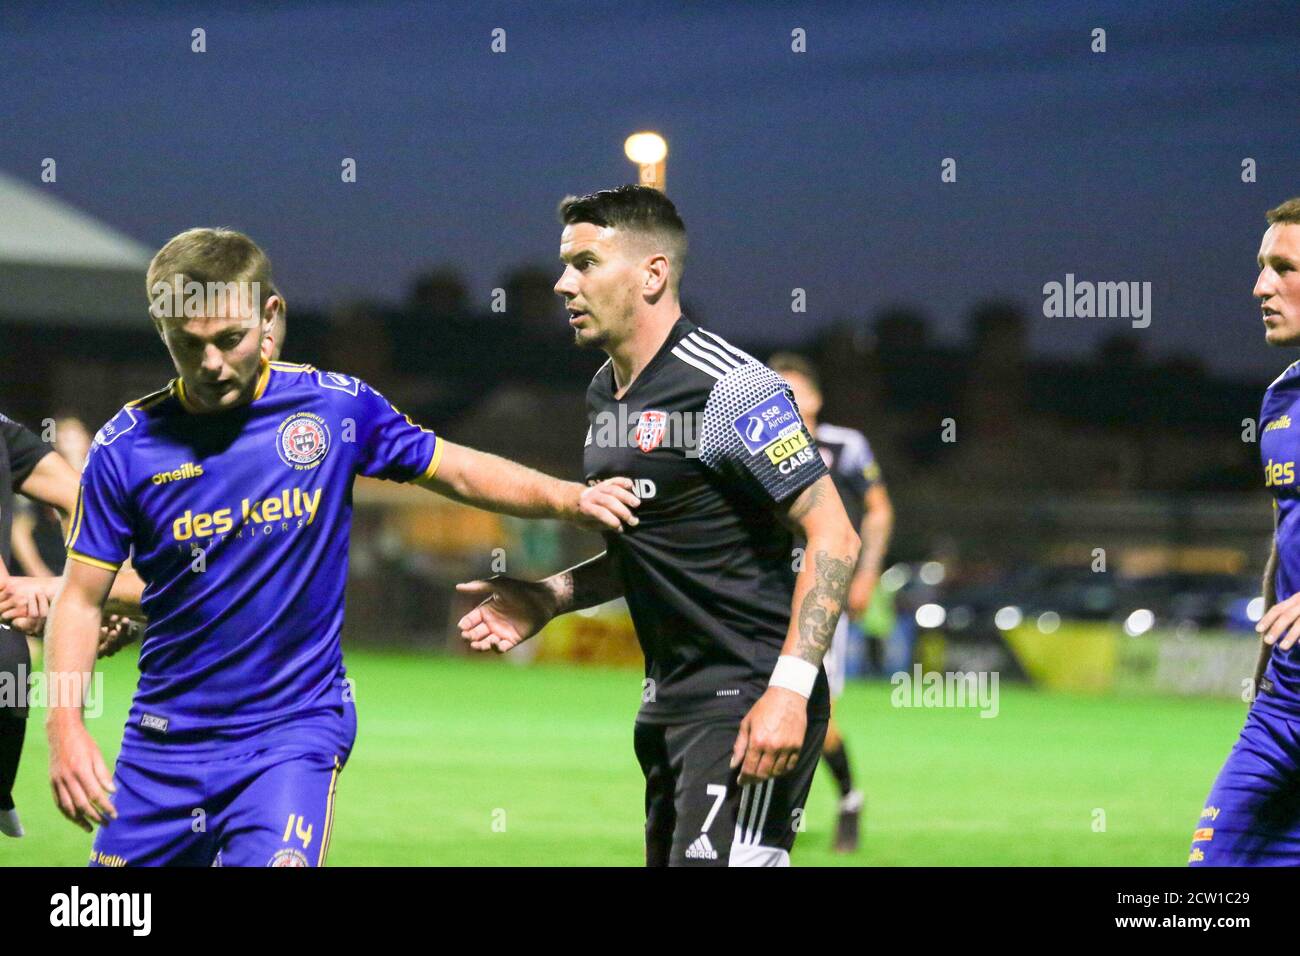 Conor Levingston holds of the advancing ADAM HAMMILL (Derry City FC)  during the Airtricity League fixture between Bohemians FC & Derry City FC 25-09- Stock Photo